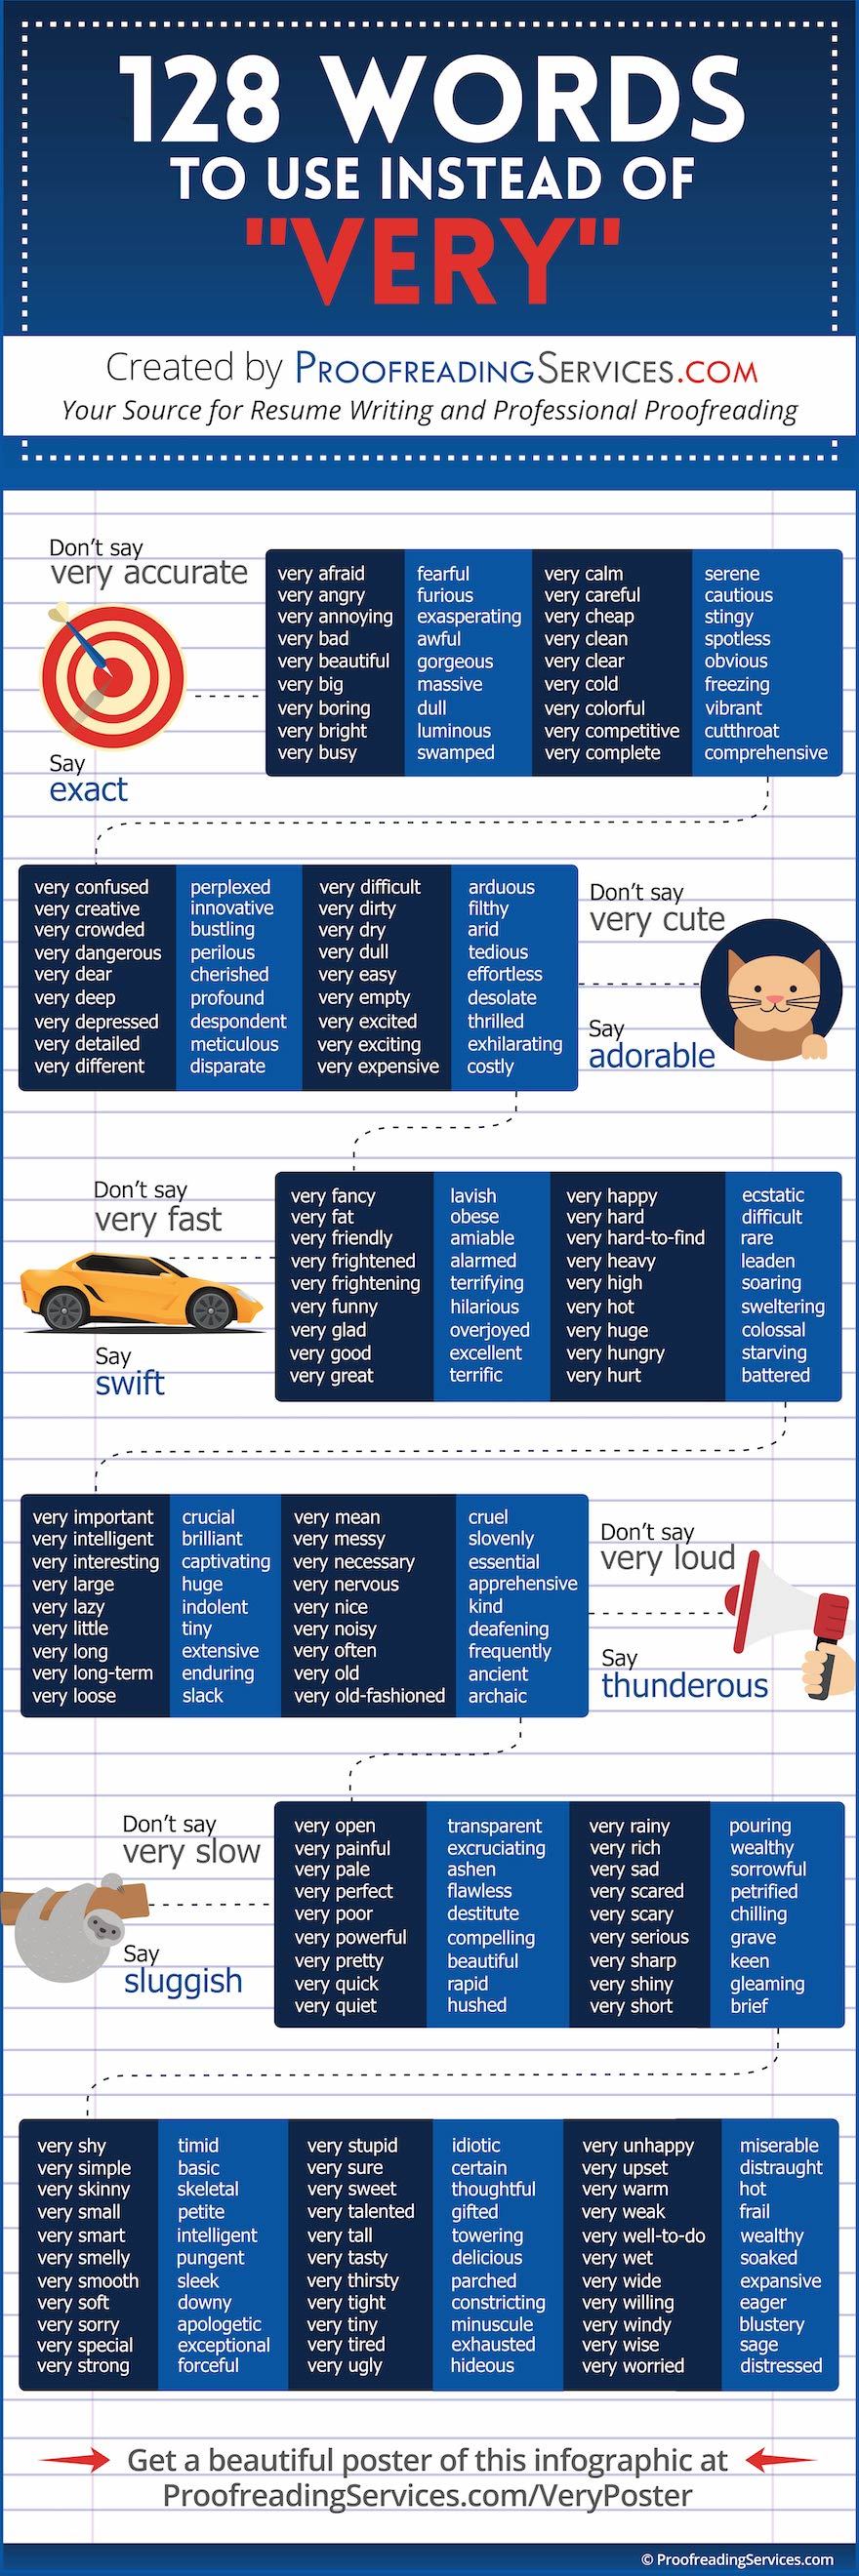 128 Words To Use Instead Of "Very"